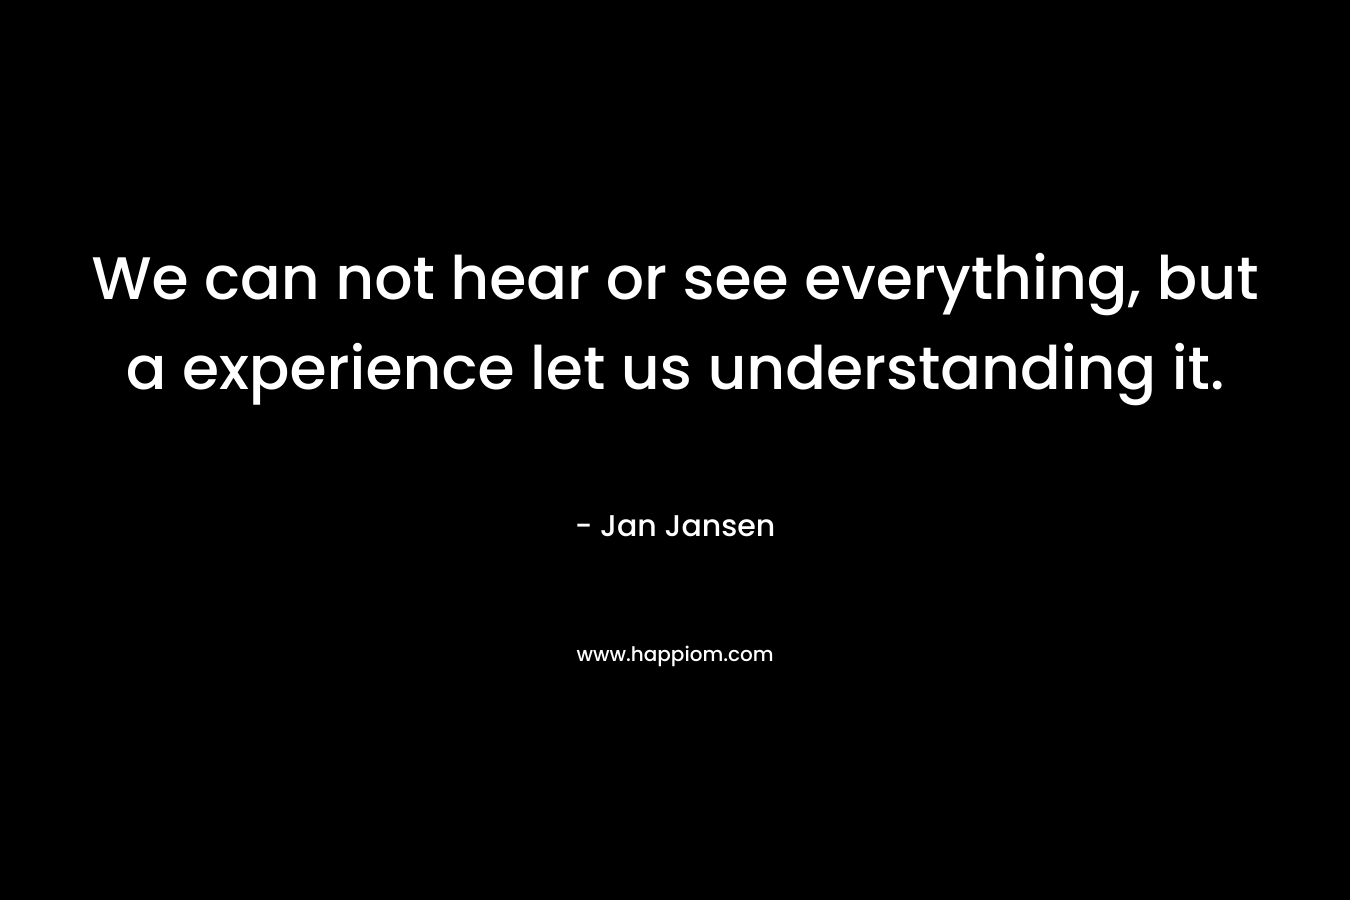 We can not hear or see everything, but a experience let us understanding it. – Jan Jansen